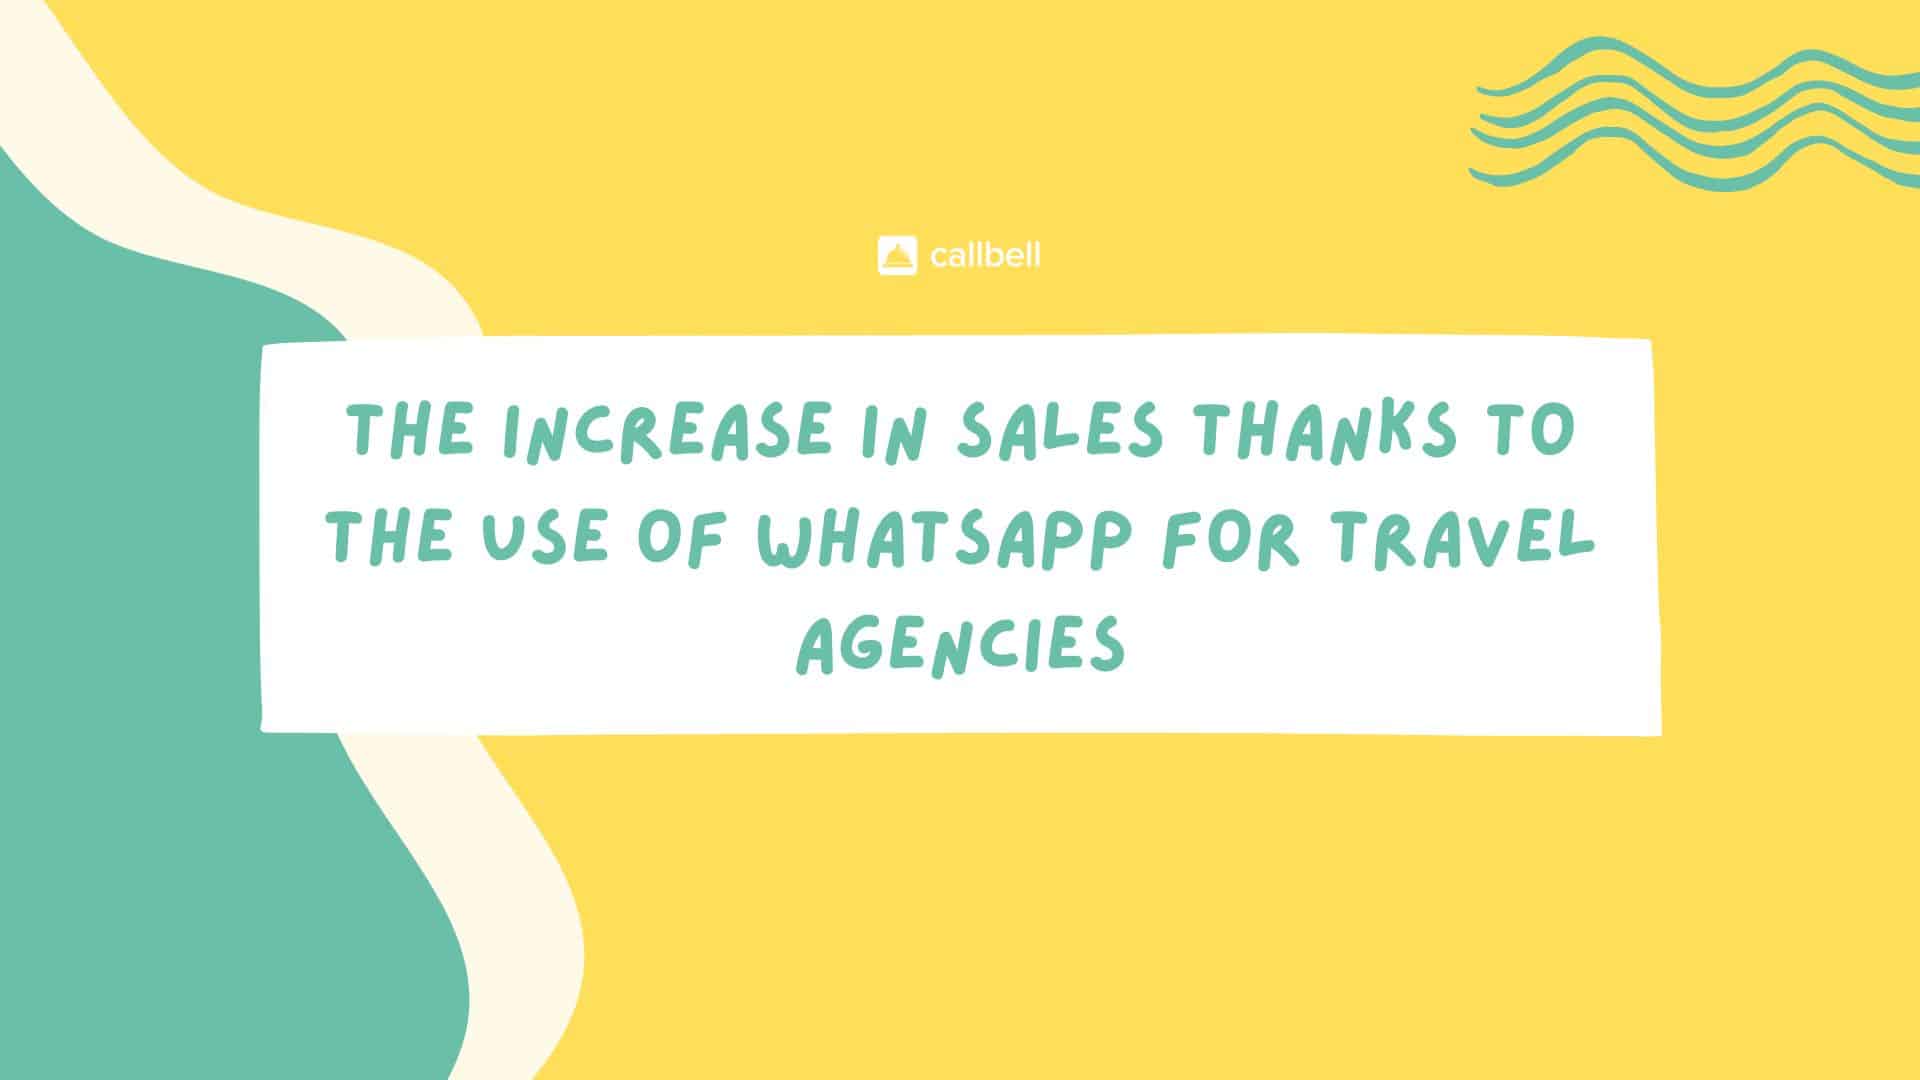 WhatsApp Business for travel agencies